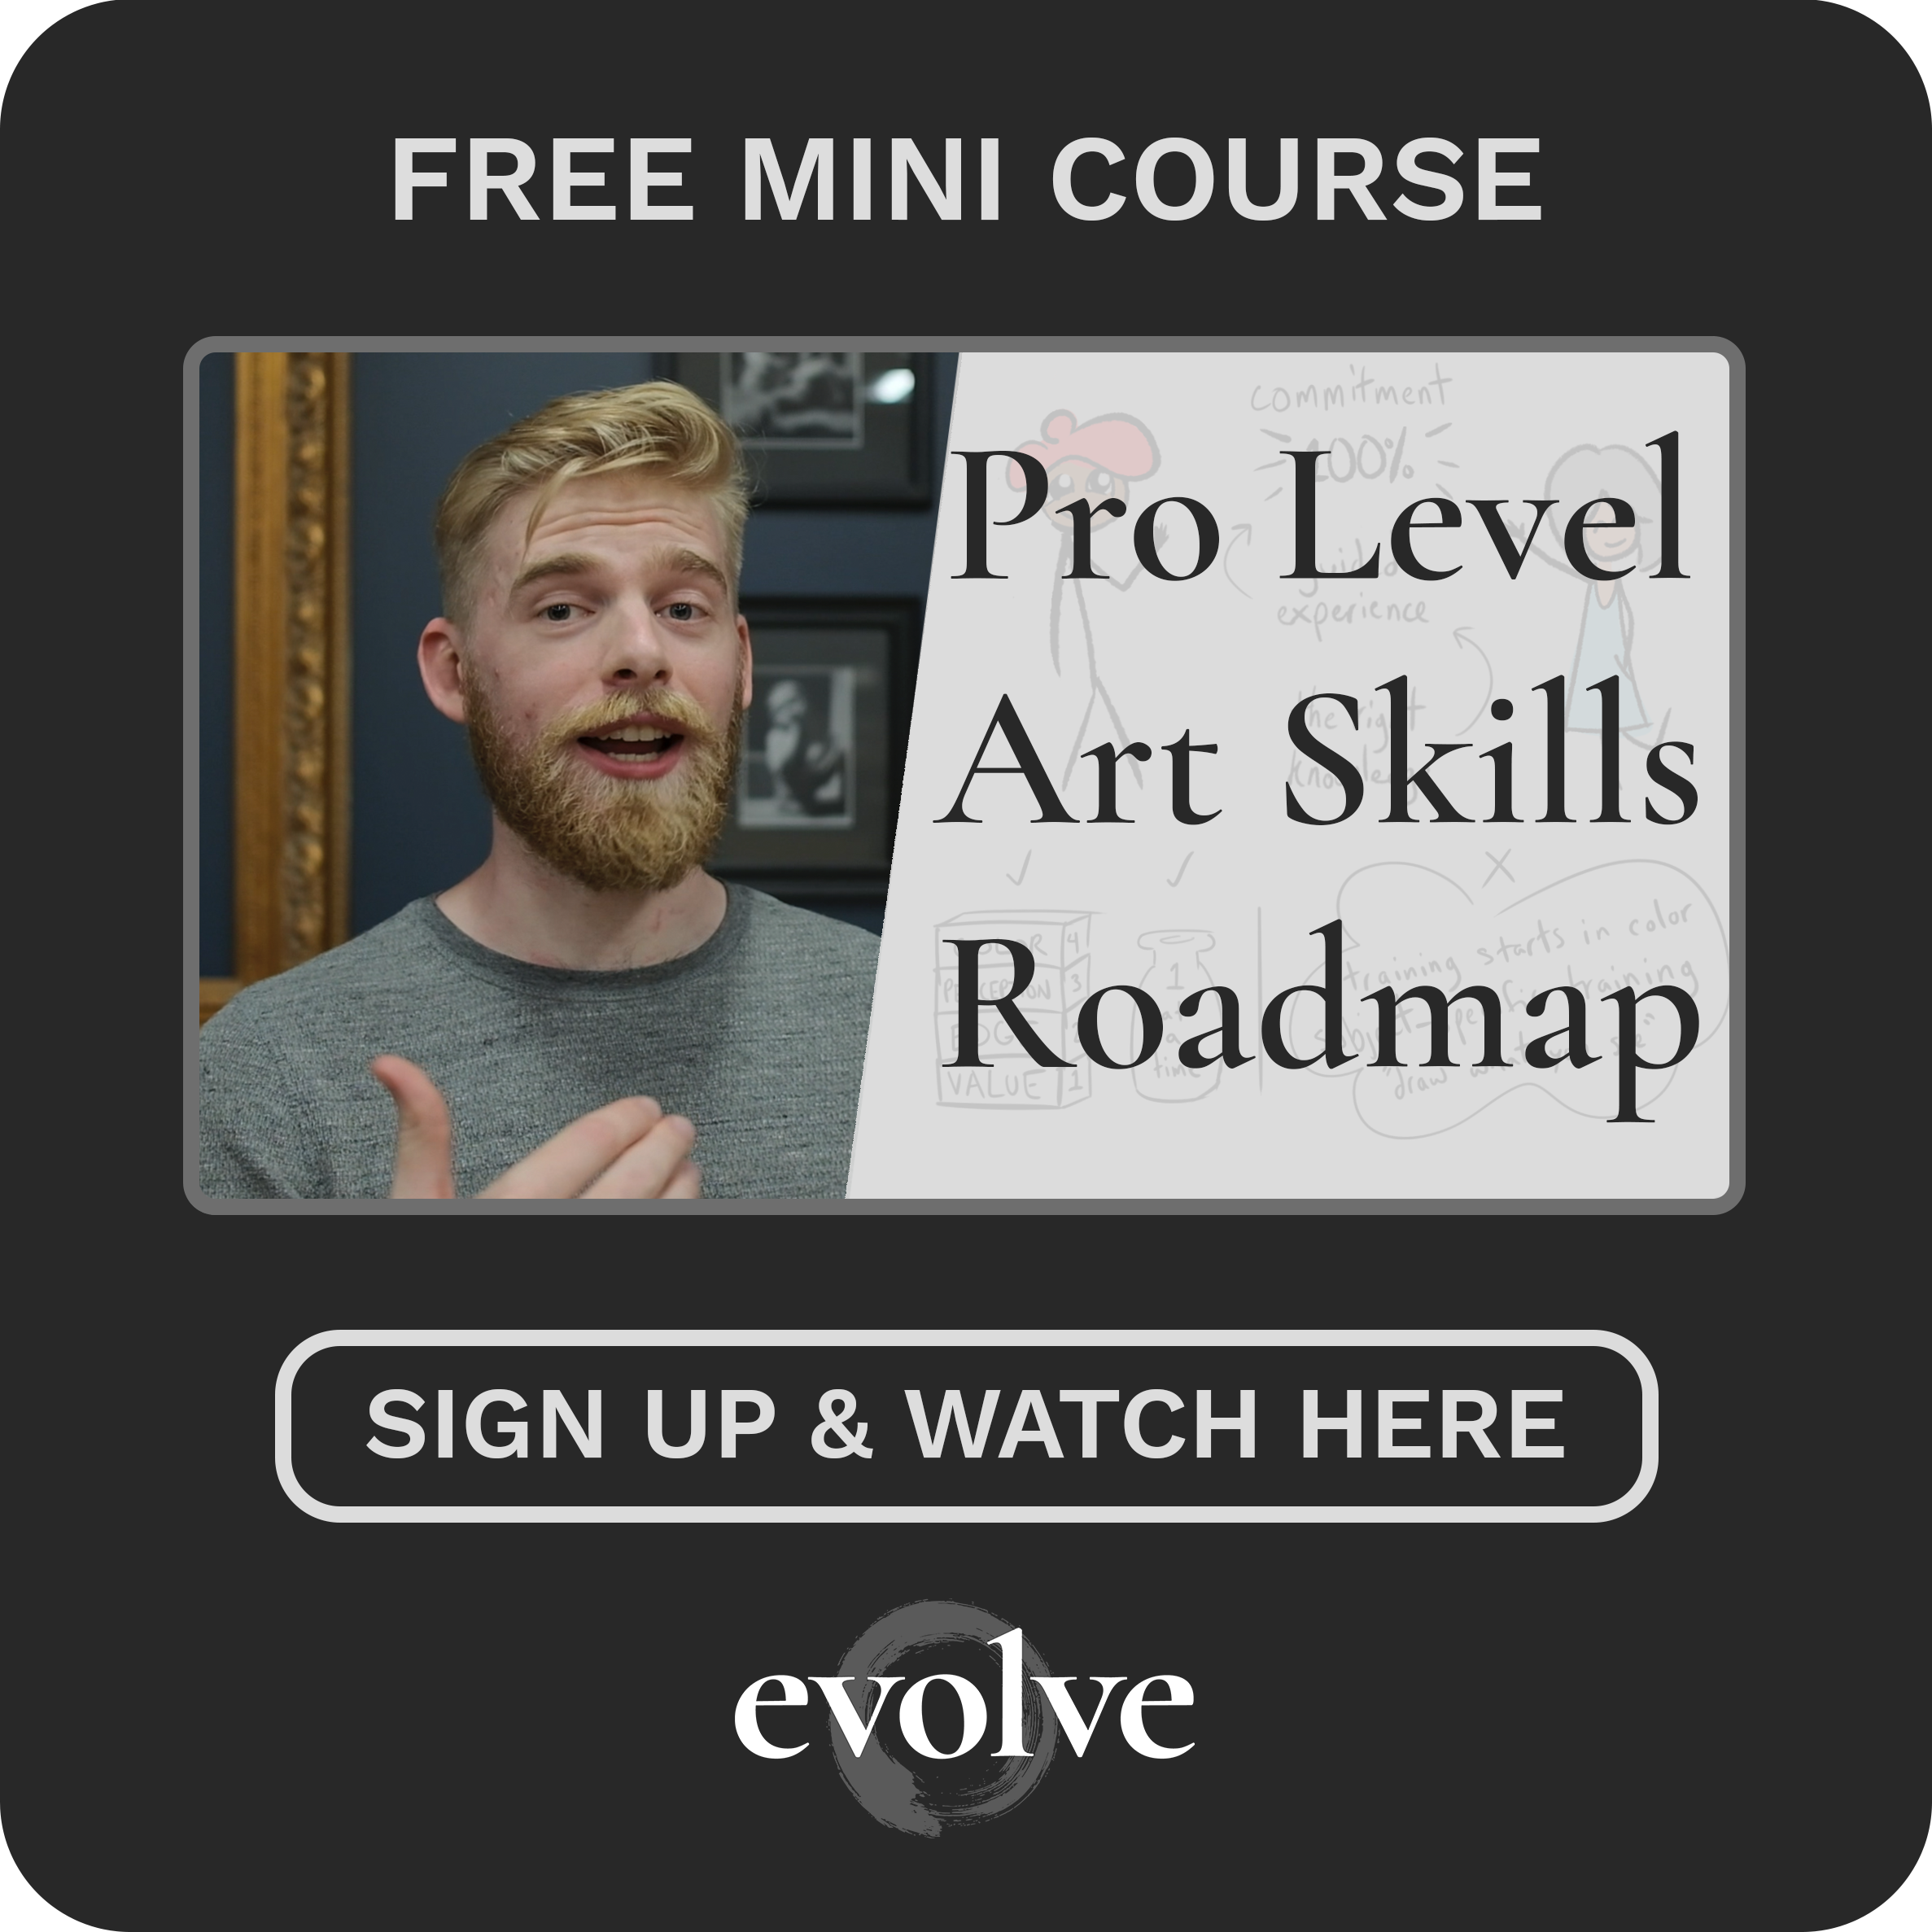 Click HERE to watch the Three Things Mini Course to find out the 3 essentials needed to produce professional-level art every time you step in front of a canvas.